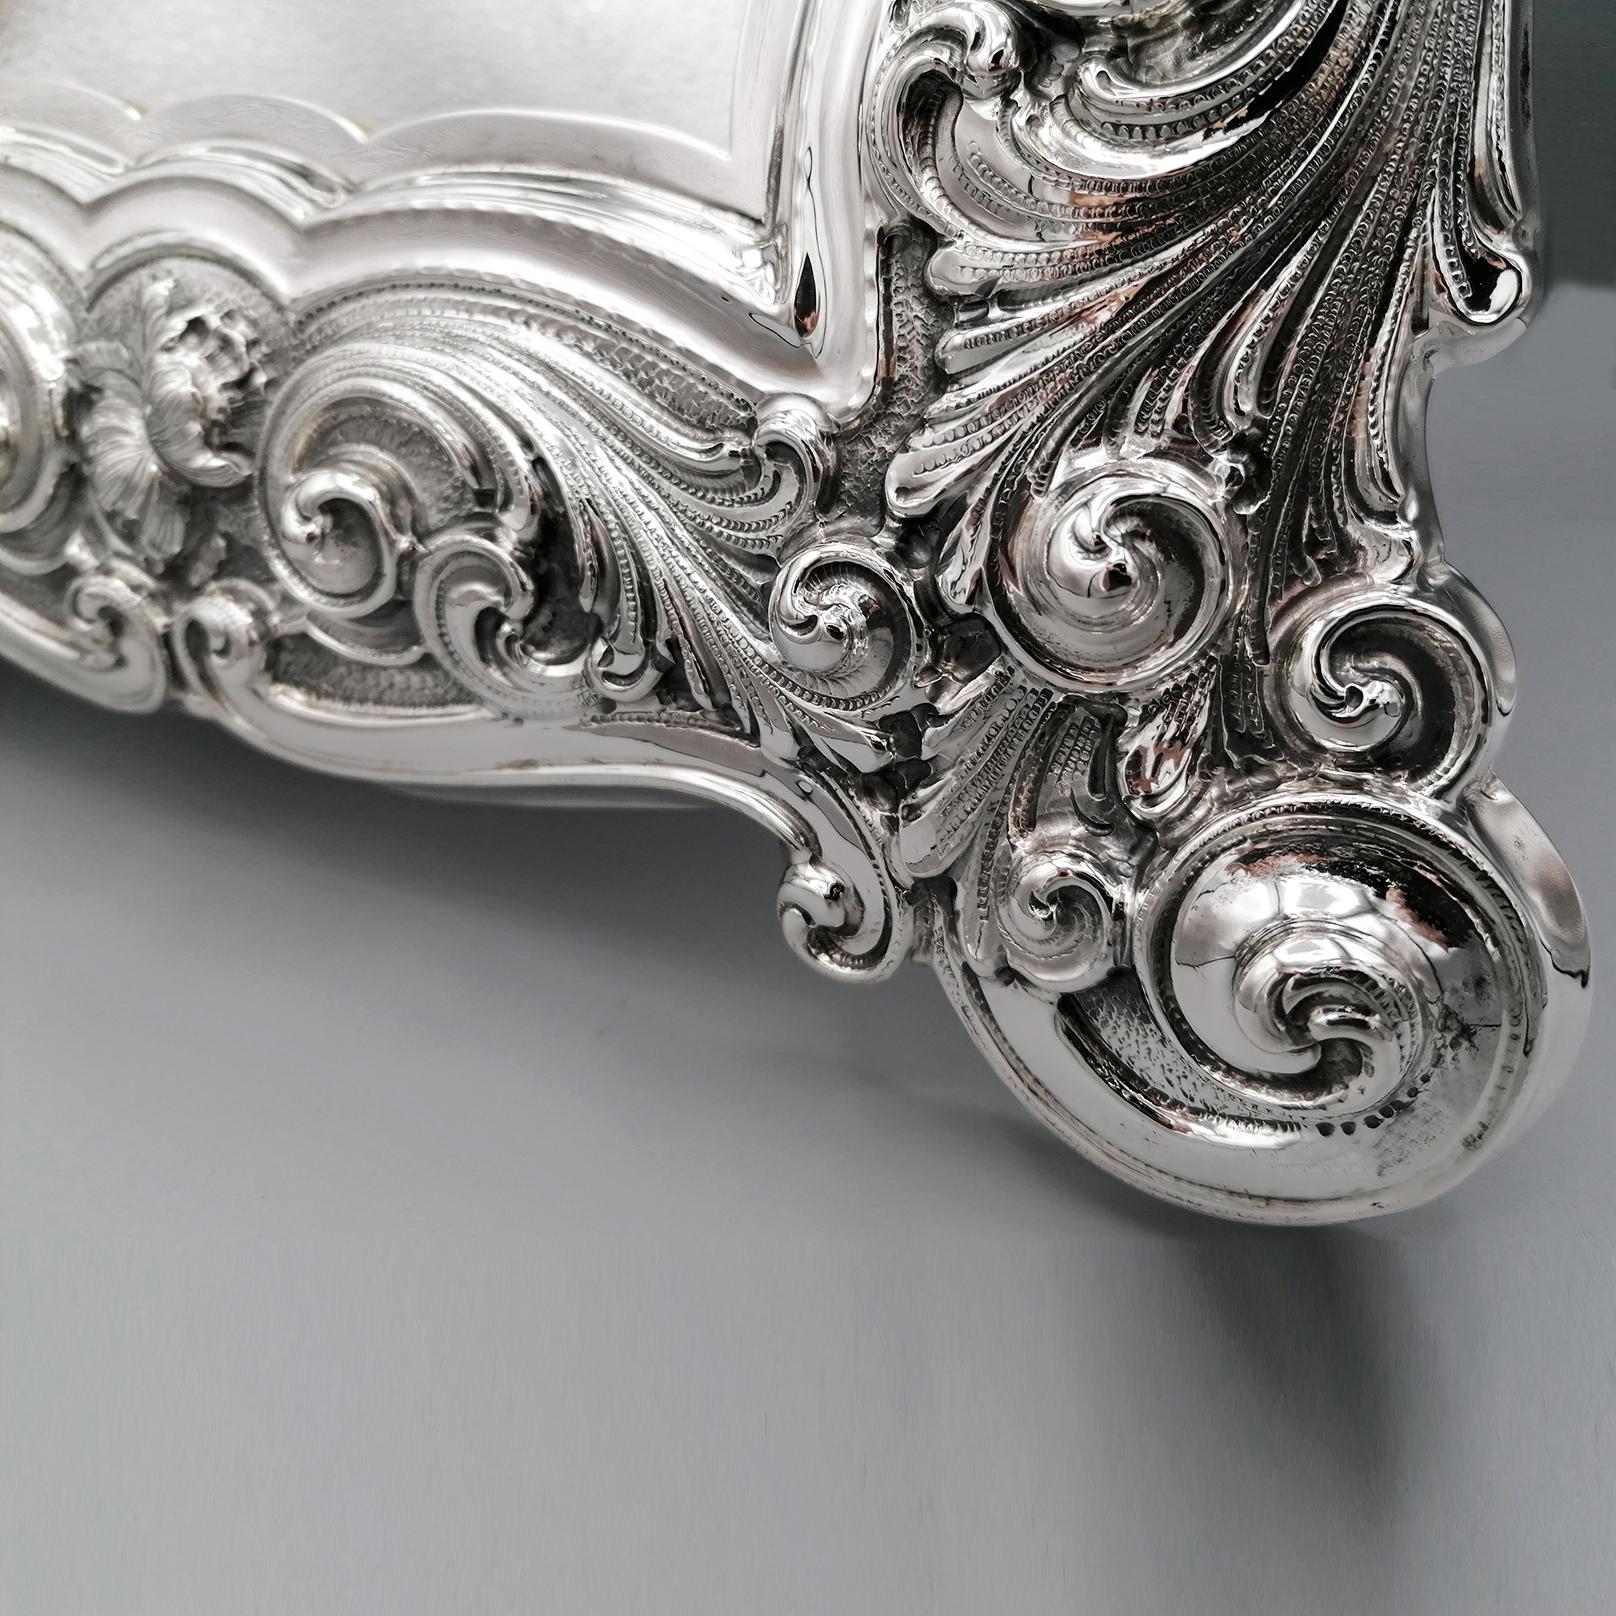 Impressive table mirror in sterling silver completely handmade in the Baroque style.
The embossed workmanship is exceptional for its craftsmanship, precision and elegance.
In the upper part, between the scrolls and the flowers, the classic Baroque